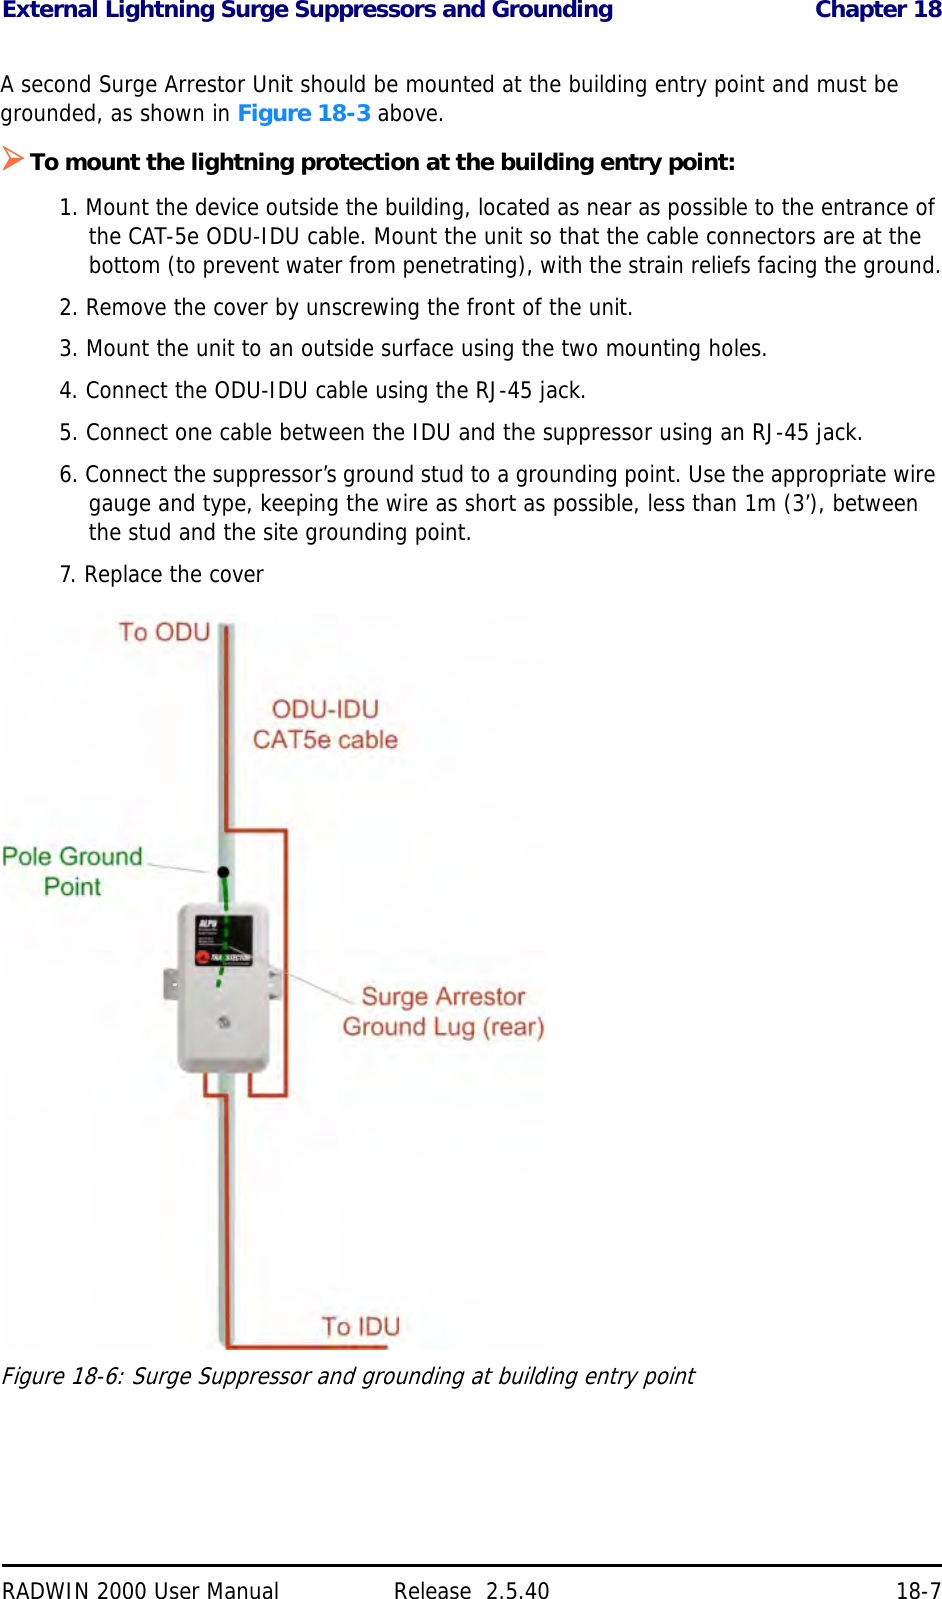 External Lightning Surge Suppressors and Grounding Chapter 18RADWIN 2000 User Manual Release  2.5.40 18-7A second Surge Arrestor Unit should be mounted at the building entry point and must be grounded, as shown in Figure 18-3 above.To mount the lightning protection at the building entry point:1. Mount the device outside the building, located as near as possible to the entrance of the CAT-5e ODU-IDU cable. Mount the unit so that the cable connectors are at the bottom (to prevent water from penetrating), with the strain reliefs facing the ground.2. Remove the cover by unscrewing the front of the unit.3. Mount the unit to an outside surface using the two mounting holes.4. Connect the ODU-IDU cable using the RJ-45 jack.5. Connect one cable between the IDU and the suppressor using an RJ-45 jack.6. Connect the suppressor’s ground stud to a grounding point. Use the appropriate wire gauge and type, keeping the wire as short as possible, less than 1m (3’), between the stud and the site grounding point.7. Replace the coverFigure 18-6: Surge Suppressor and grounding at building entry point